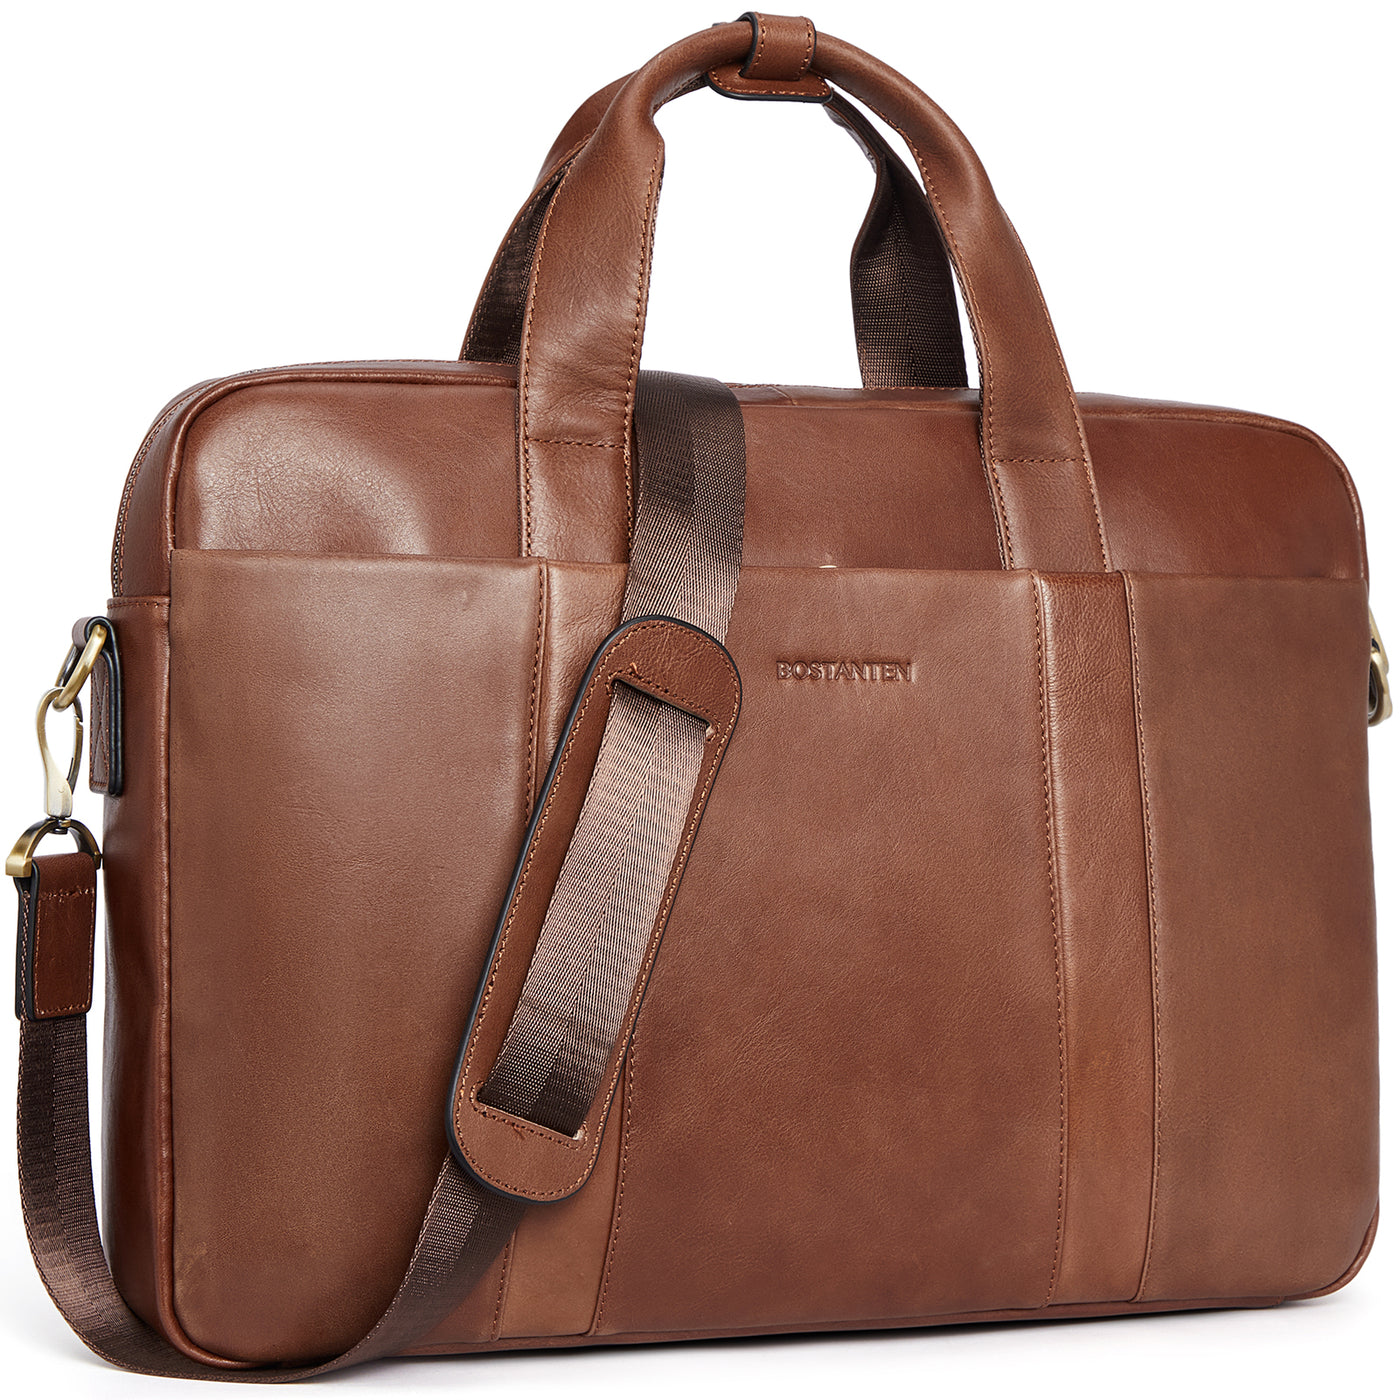 Soft Leather Briefcase with Shoulder Strap for 15.6 inch Laptop - Perfect for Men